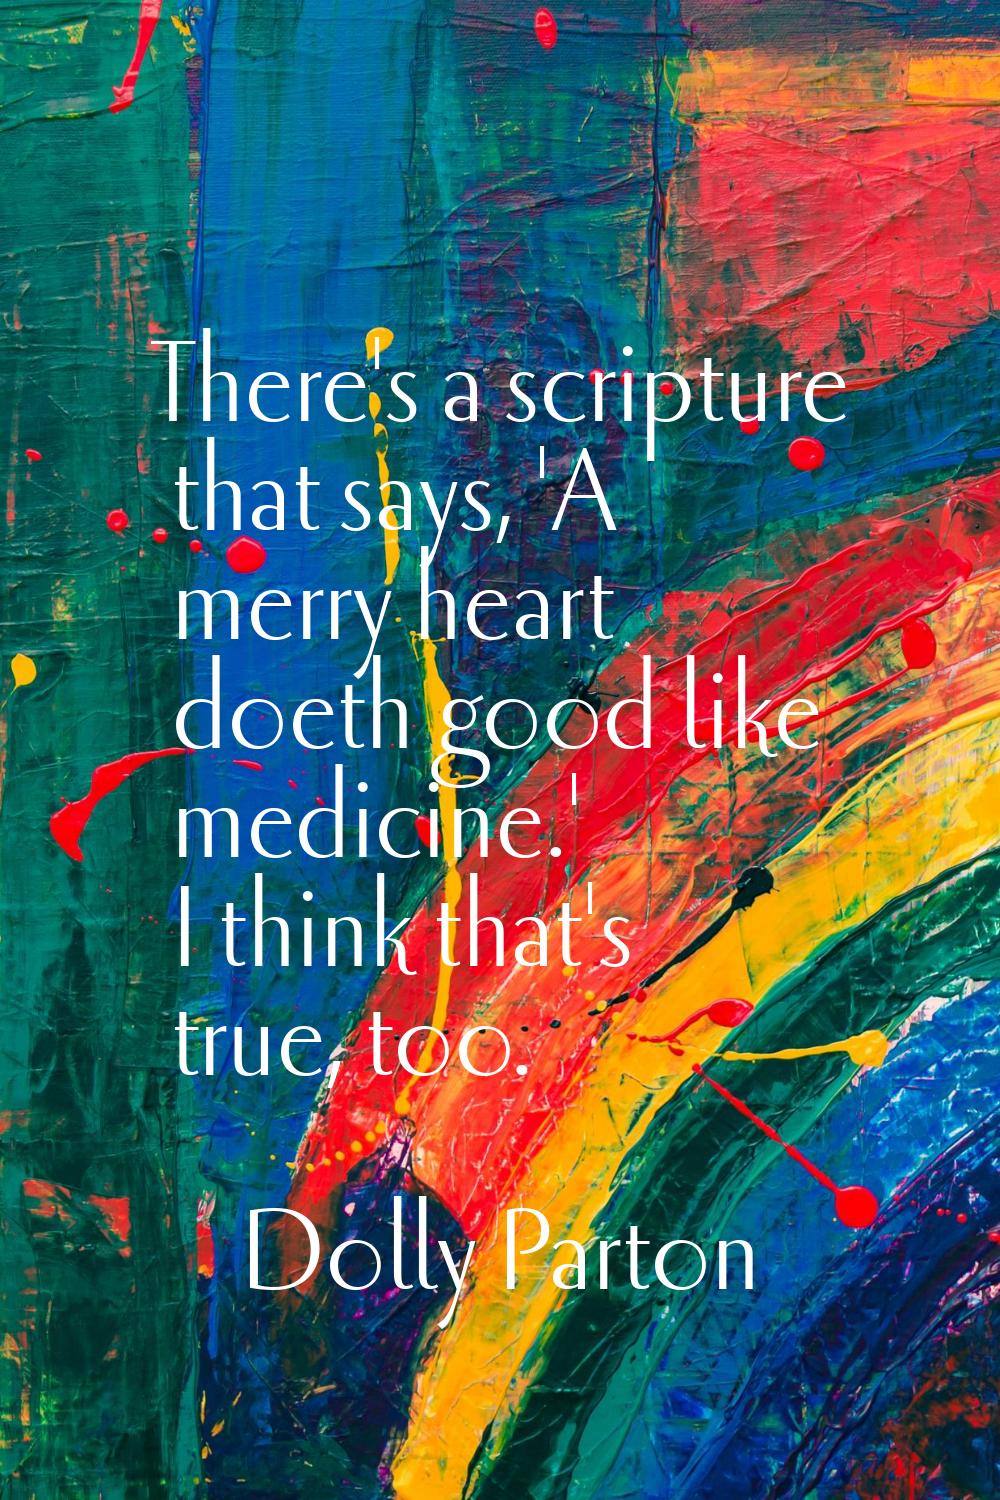 There's a scripture that says, 'A merry heart doeth good like medicine.' I think that's true, too.